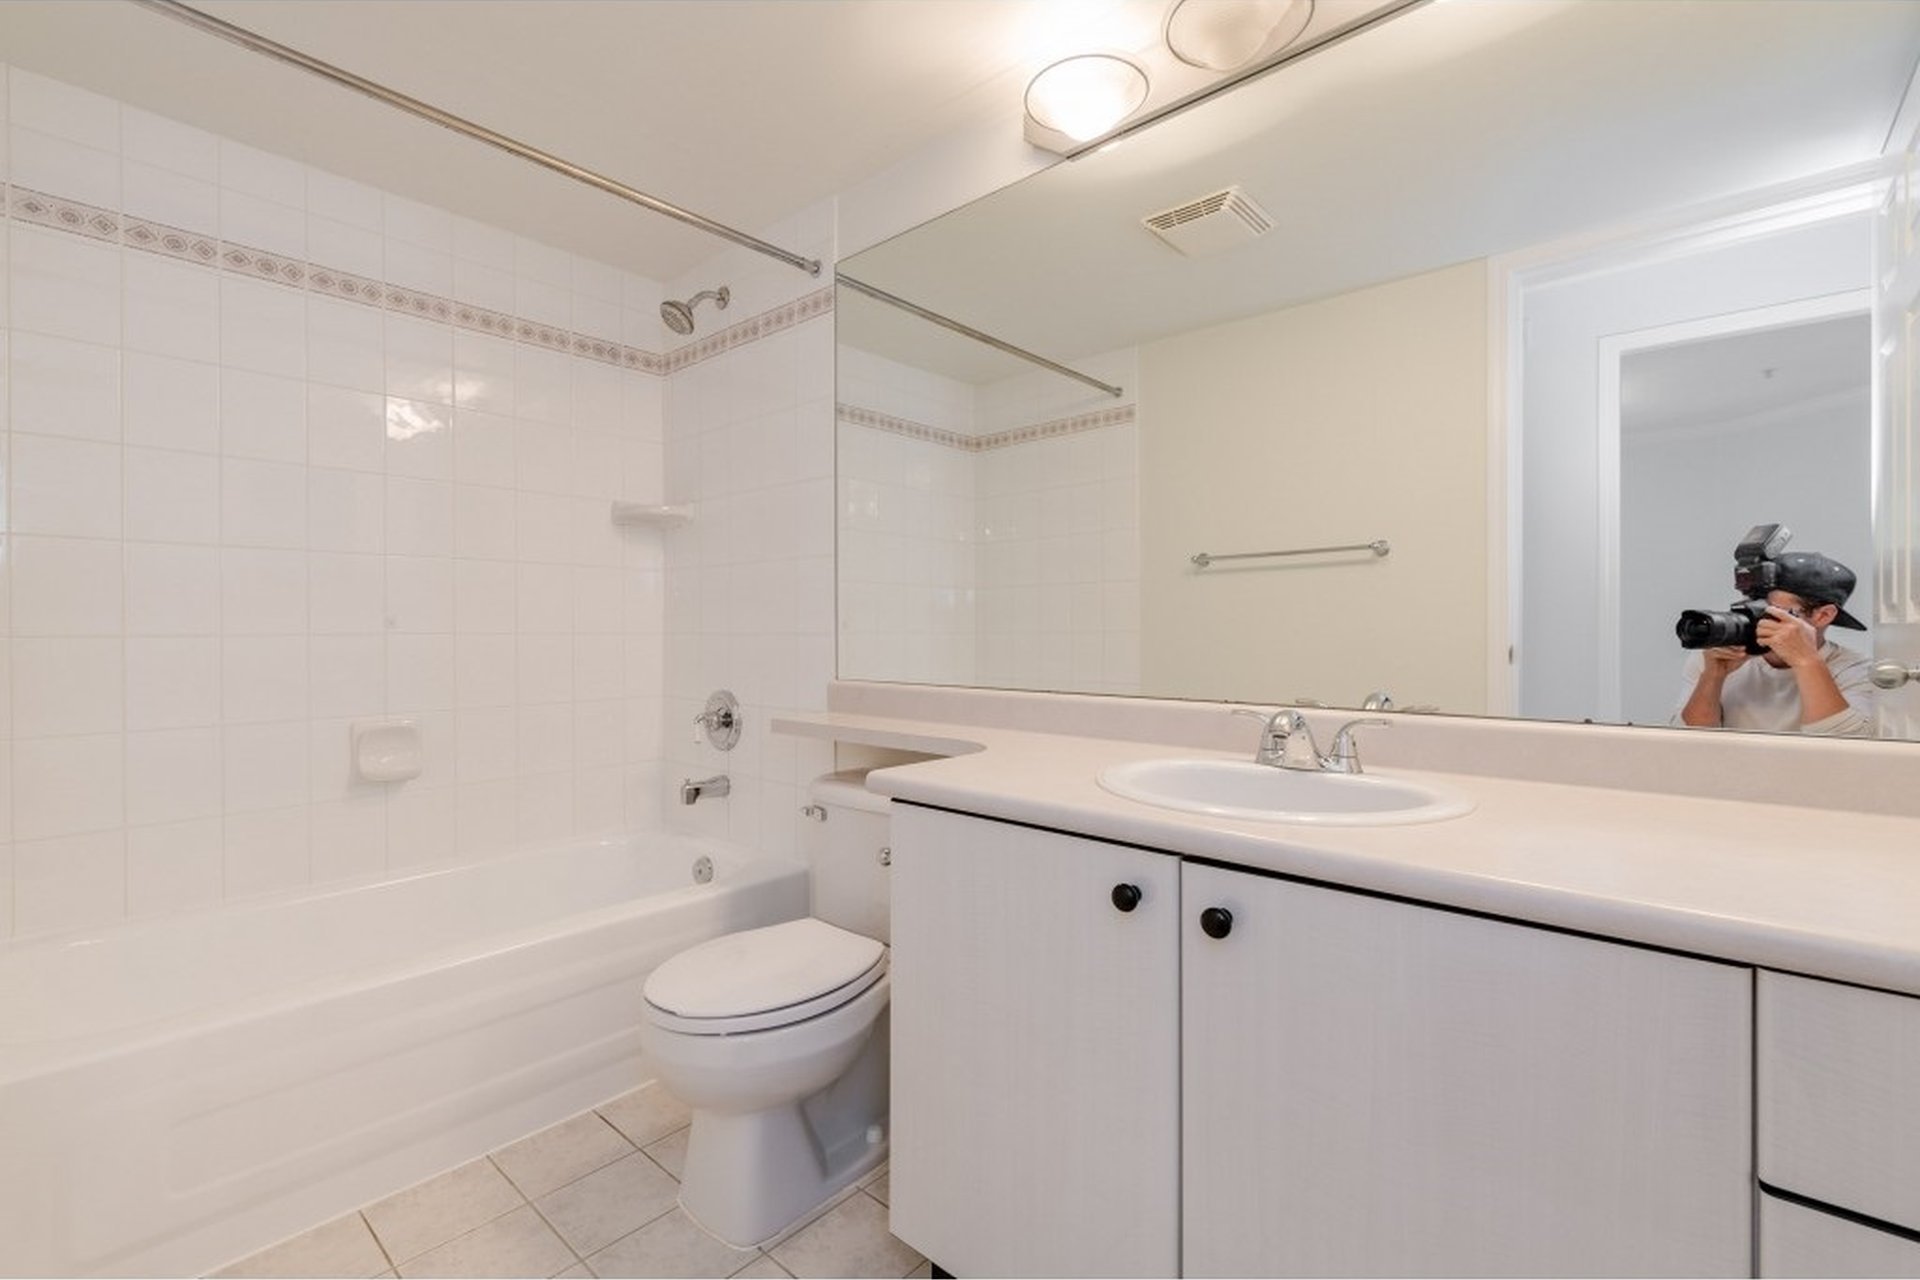 bad mls photos in 2019 real estate